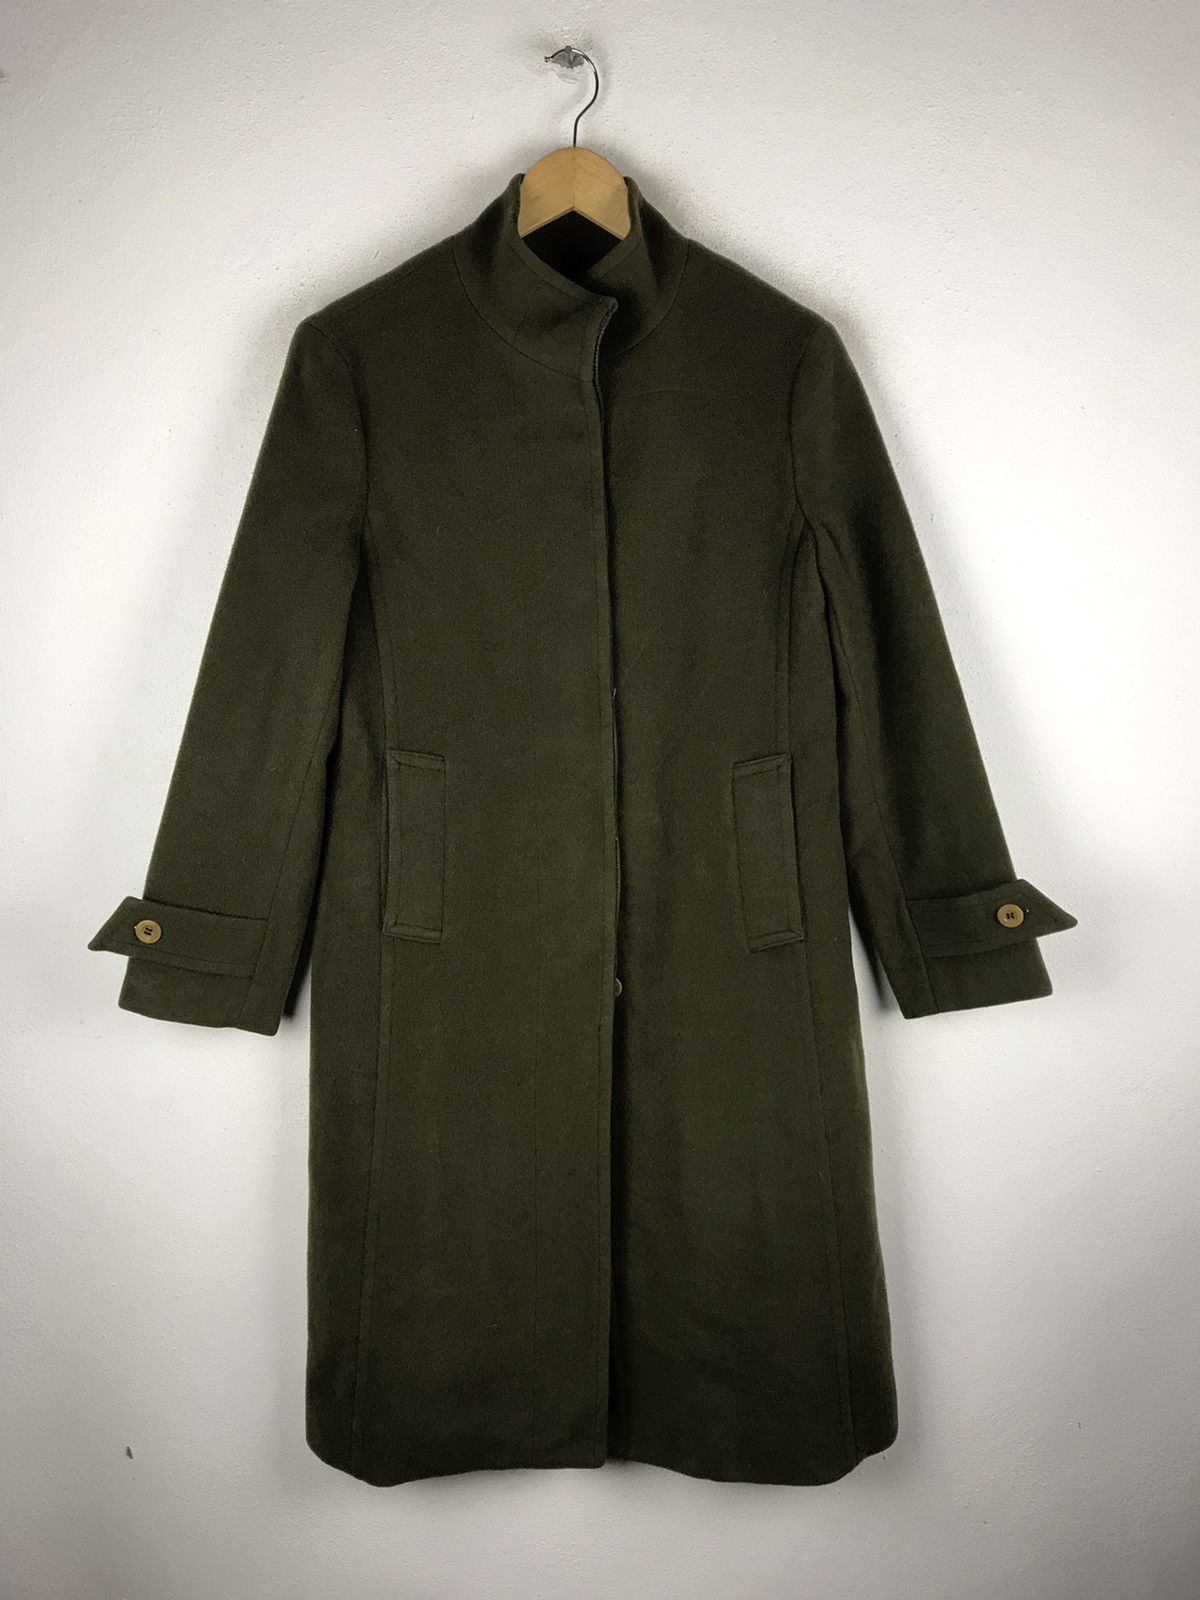 Vintage HYSTERICS GLAMOUR OVERCOAT CASHMERE AND WOOL FABRIC | Grailed